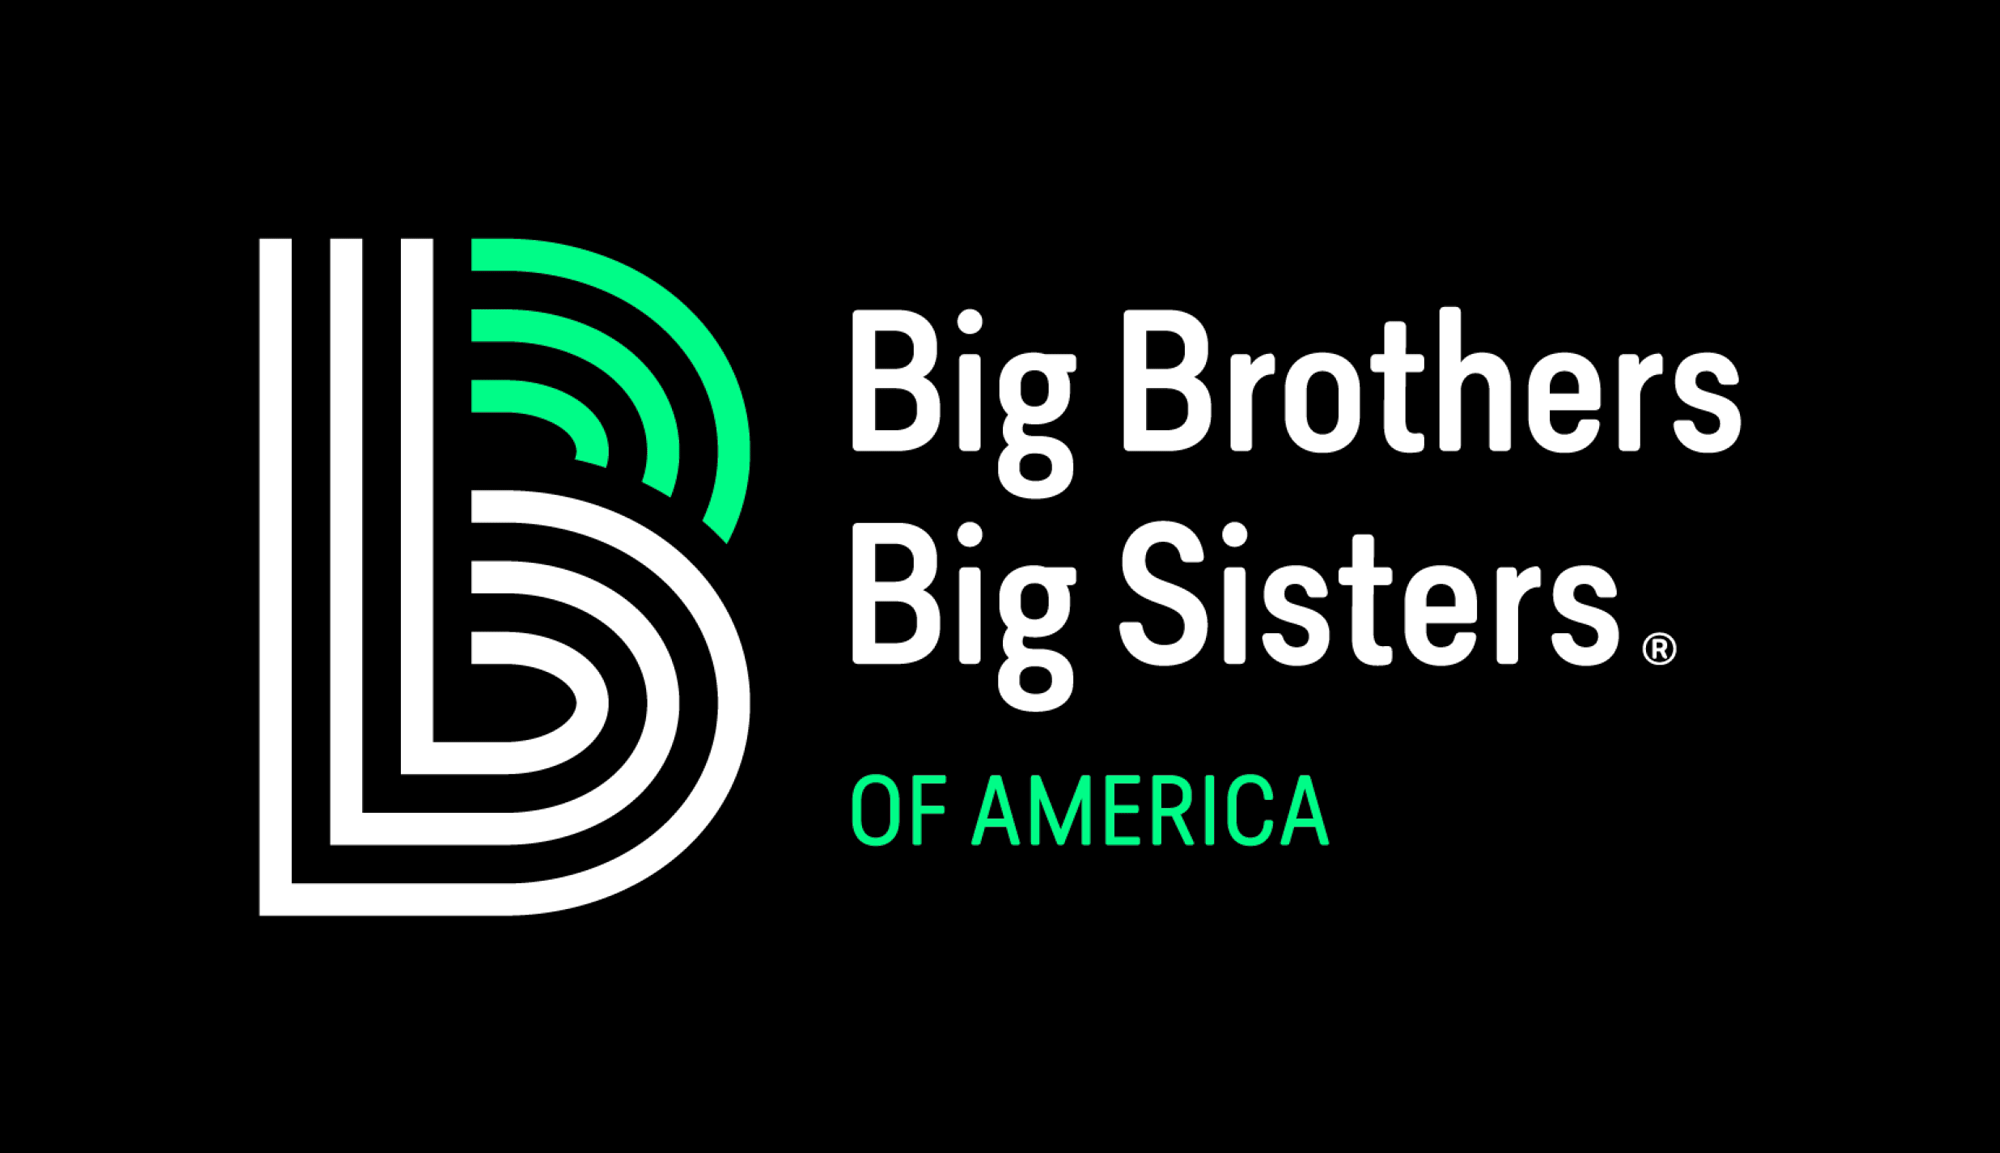 Big B Logo - Brand New: New Logo and Identity for Big Brothers Big Sisters by Barkley